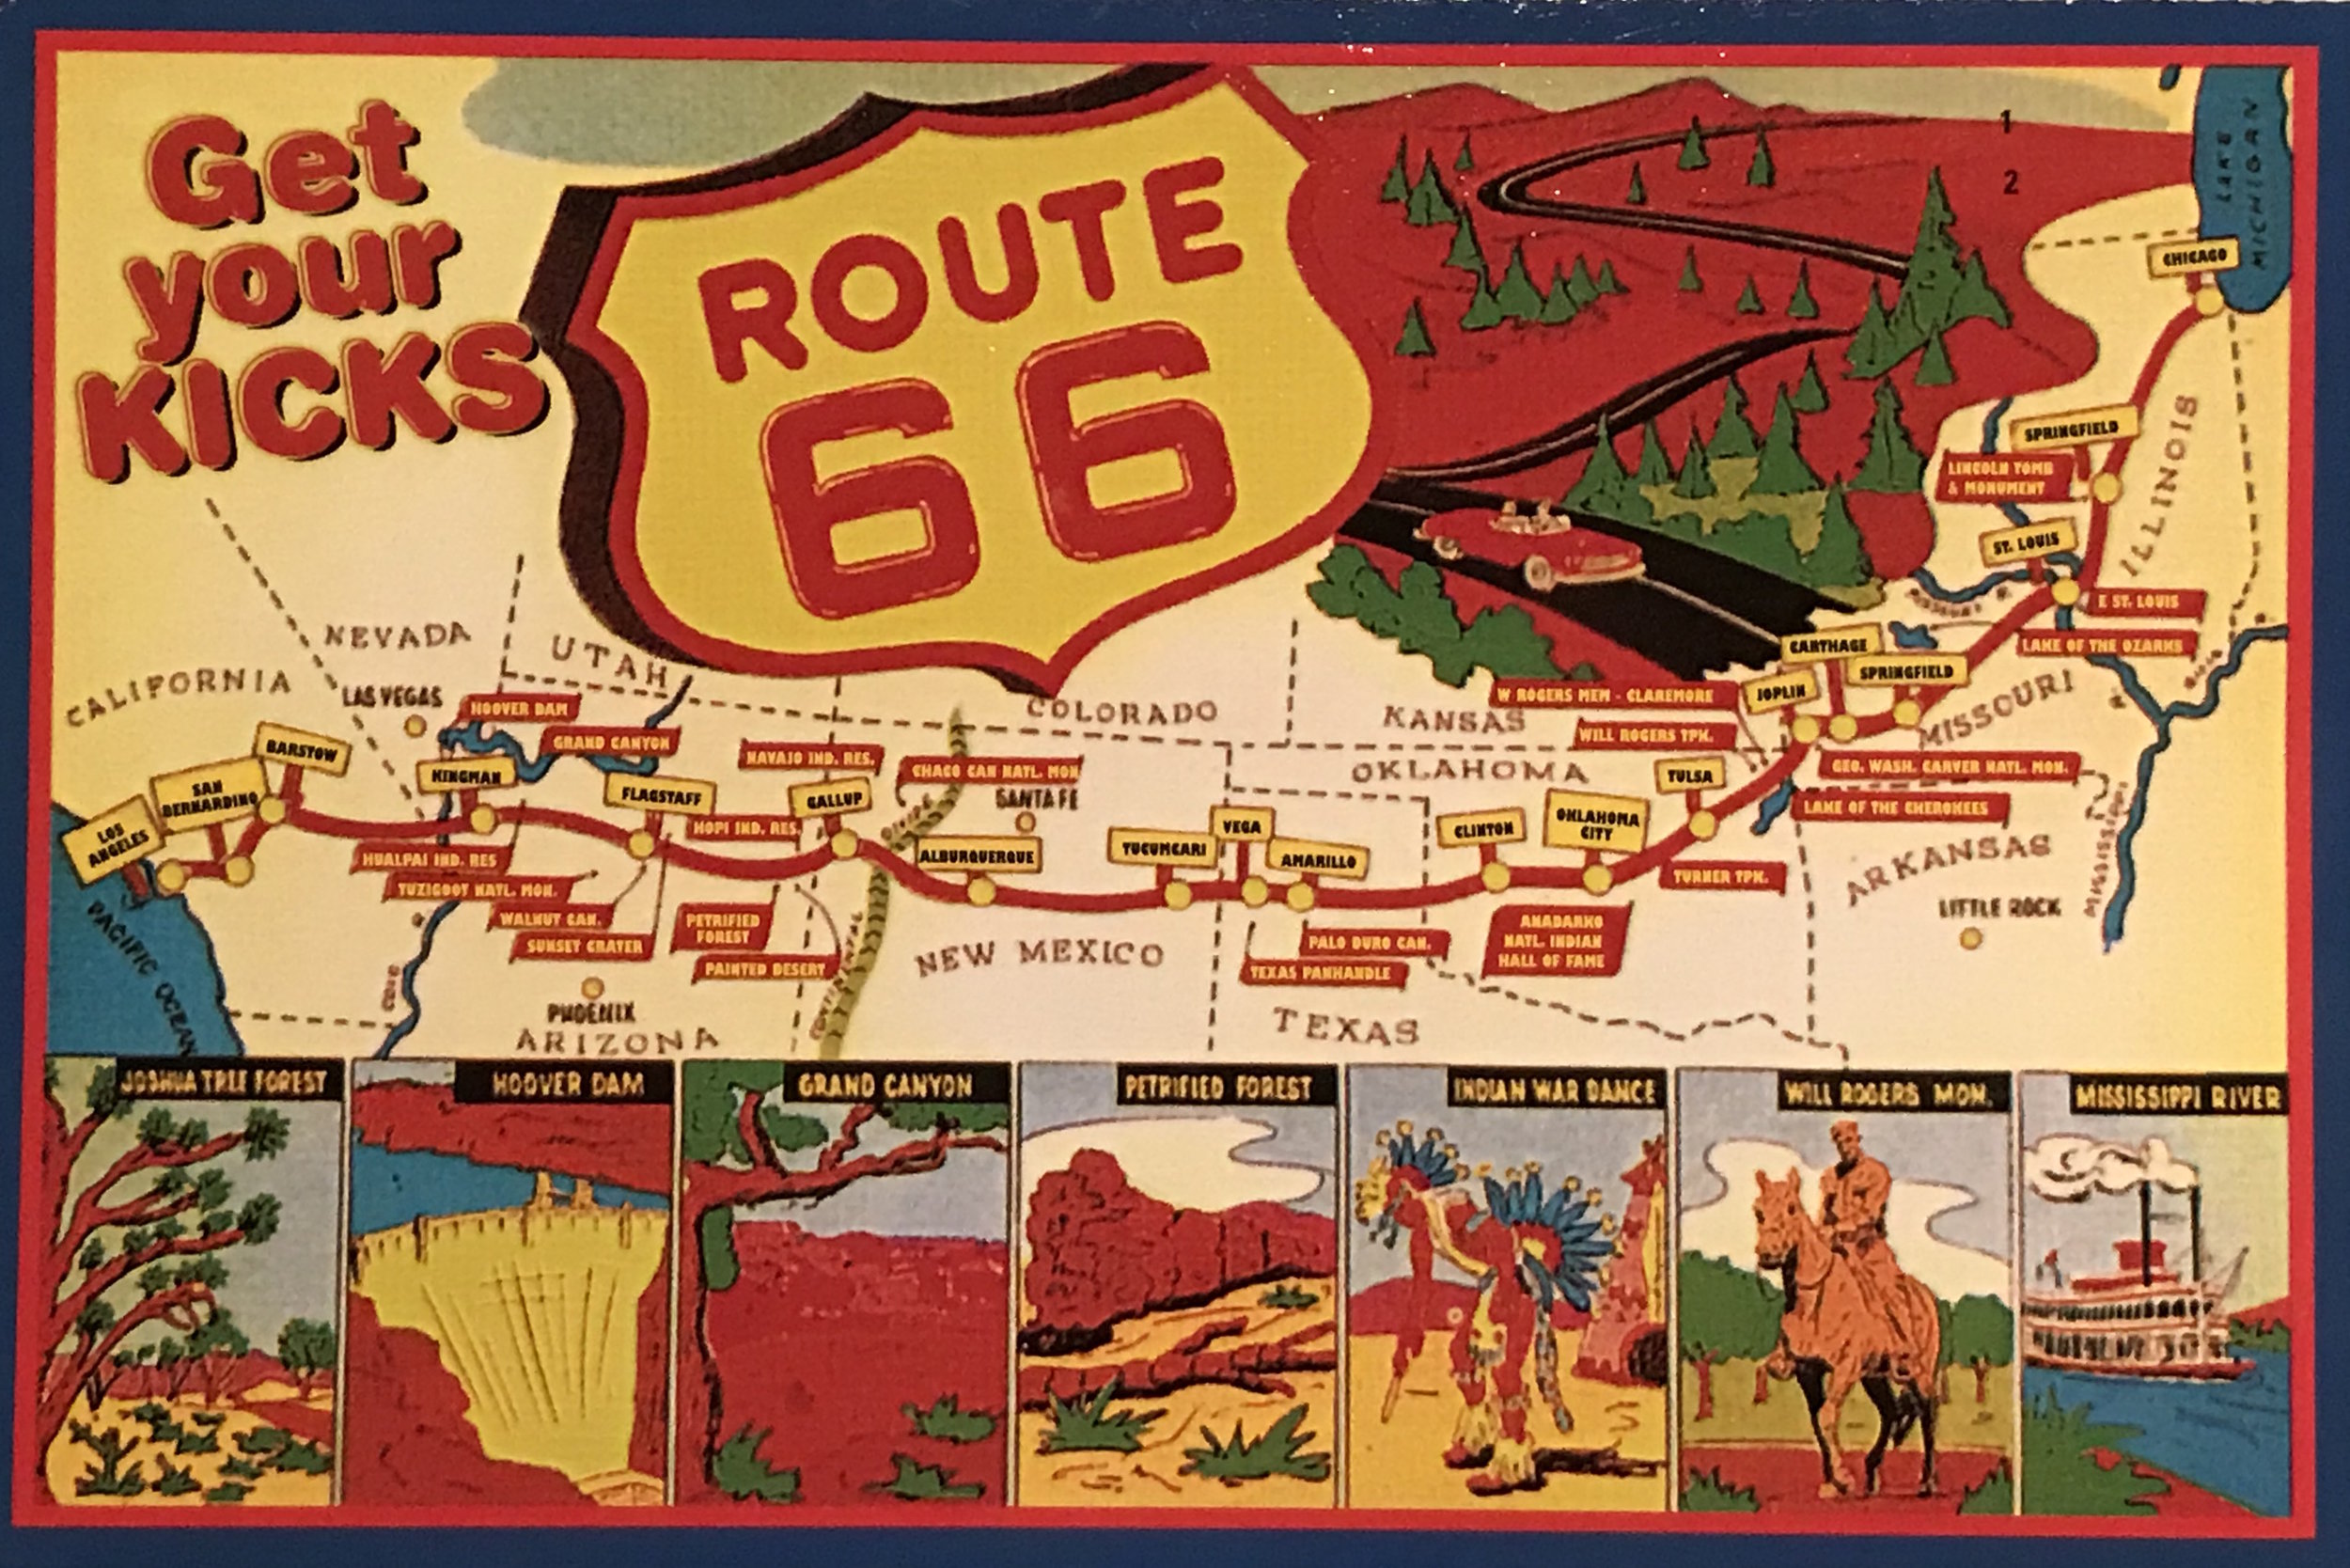  A vintage postcard shows the route of the now-defunct Route 66.  